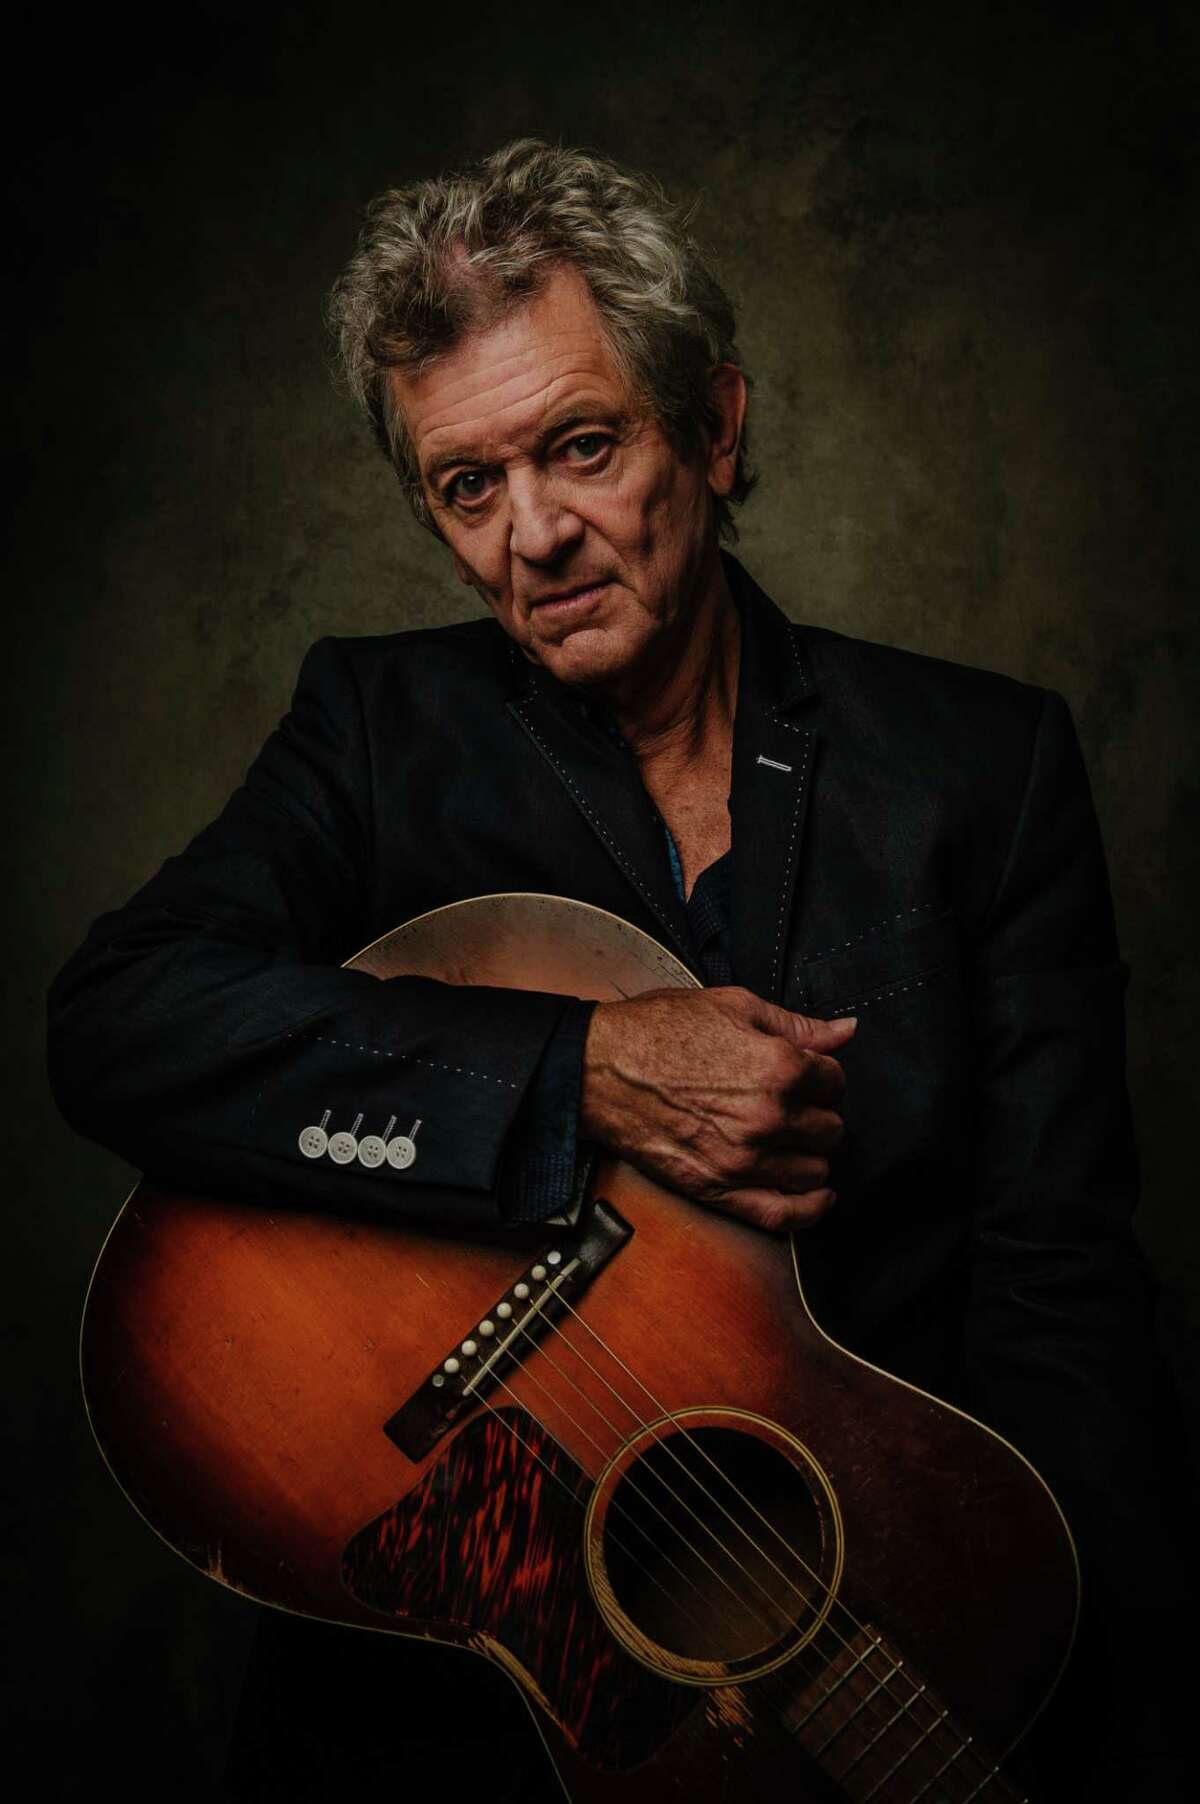 "People I know who I've had 40-year relationships with are leaving the planet. So you have to focus on what's meaningful," Rodney Crowell says.